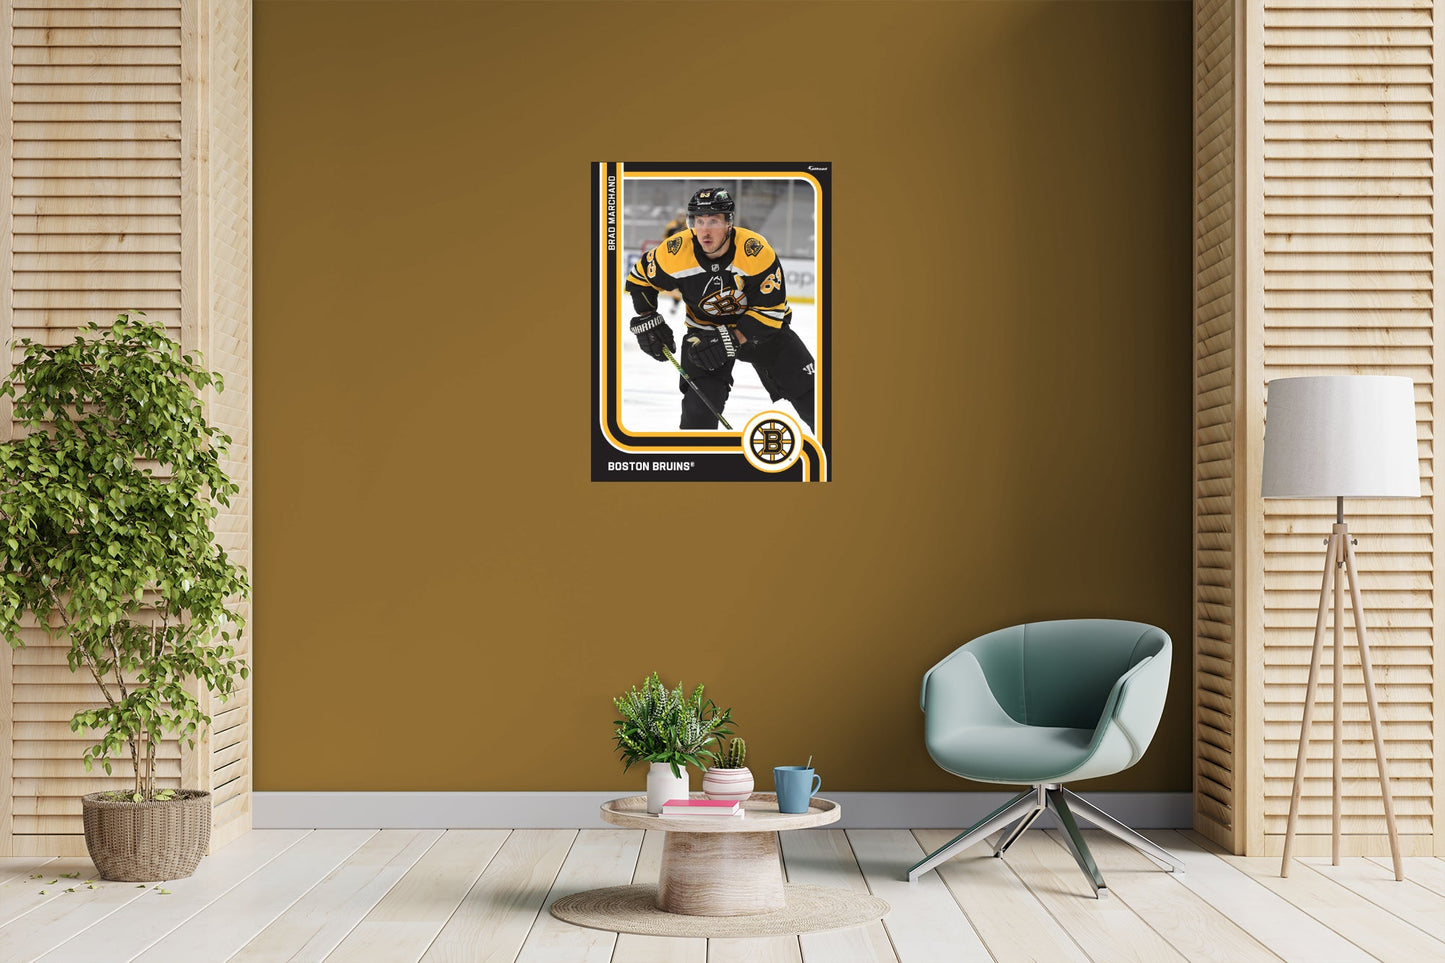 Boston Bruins: Brad Marchand Poster - Officially Licensed NHL Removable Adhesive Decal